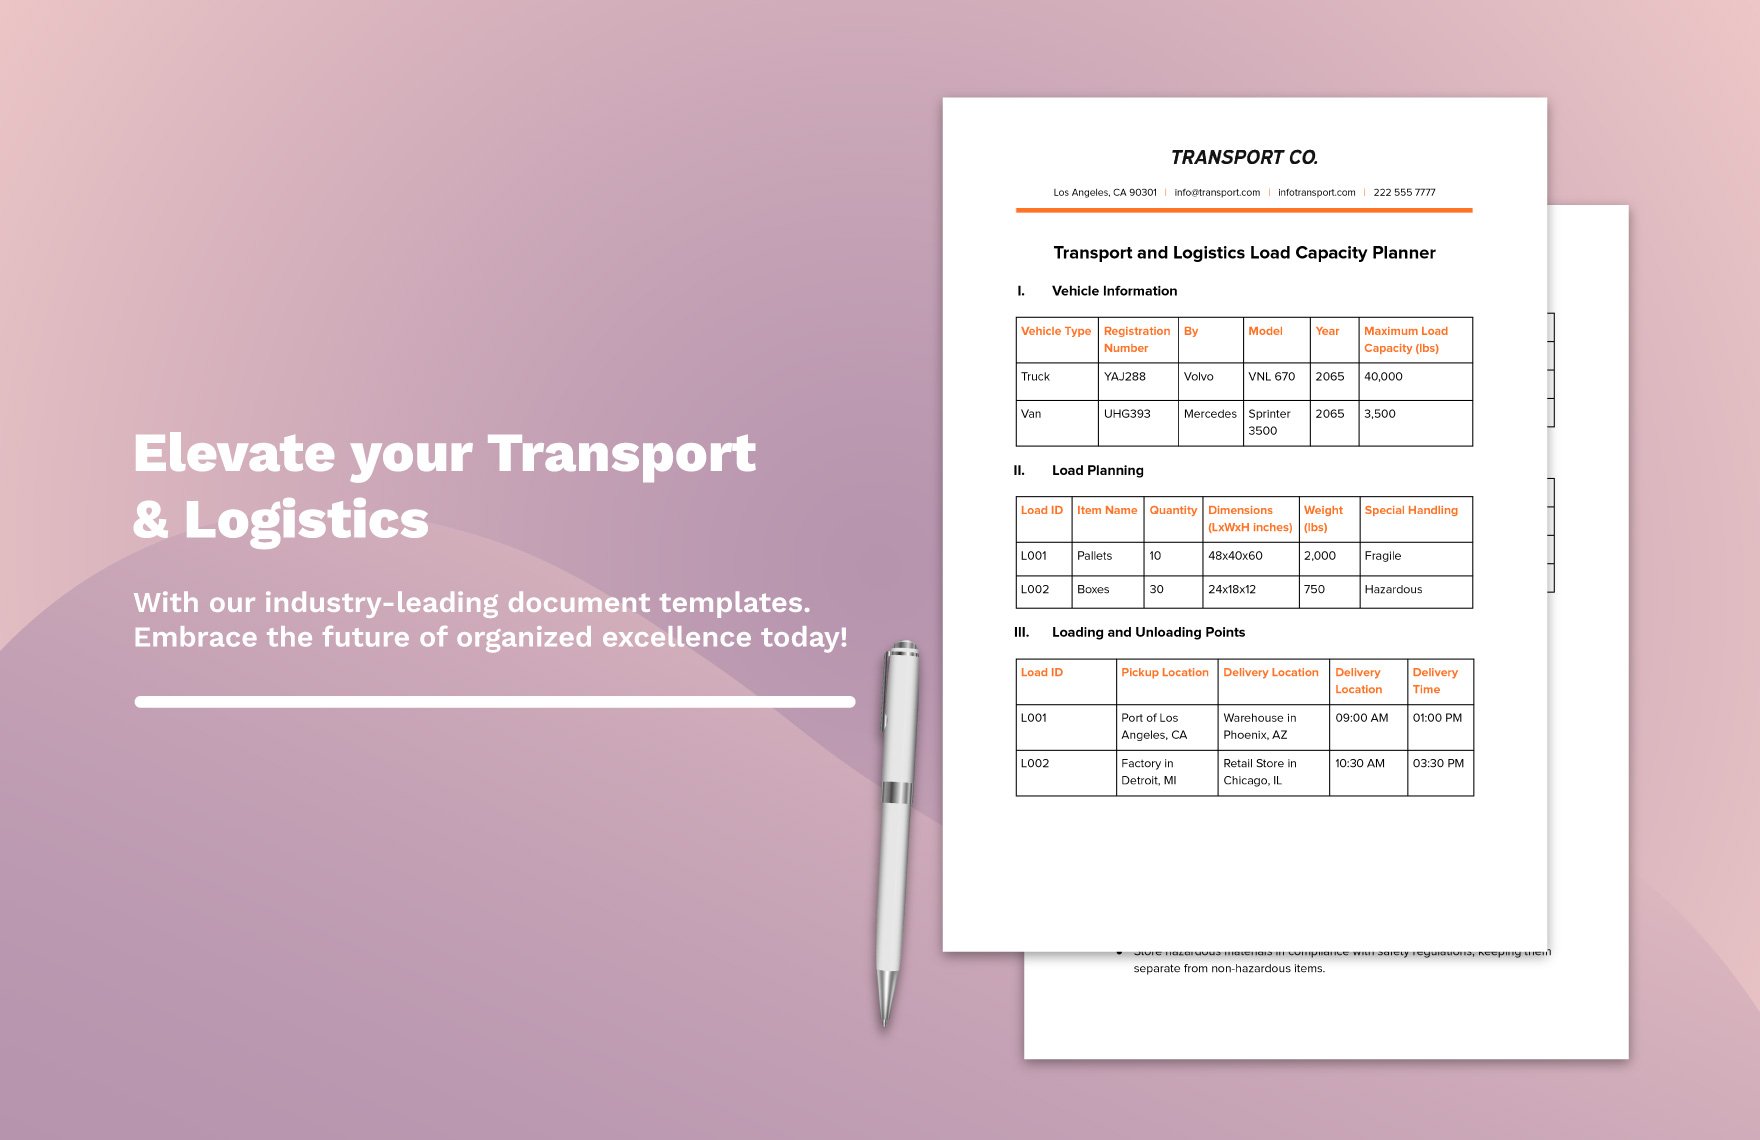 Transport and Logistics Load Capacity Planner Template